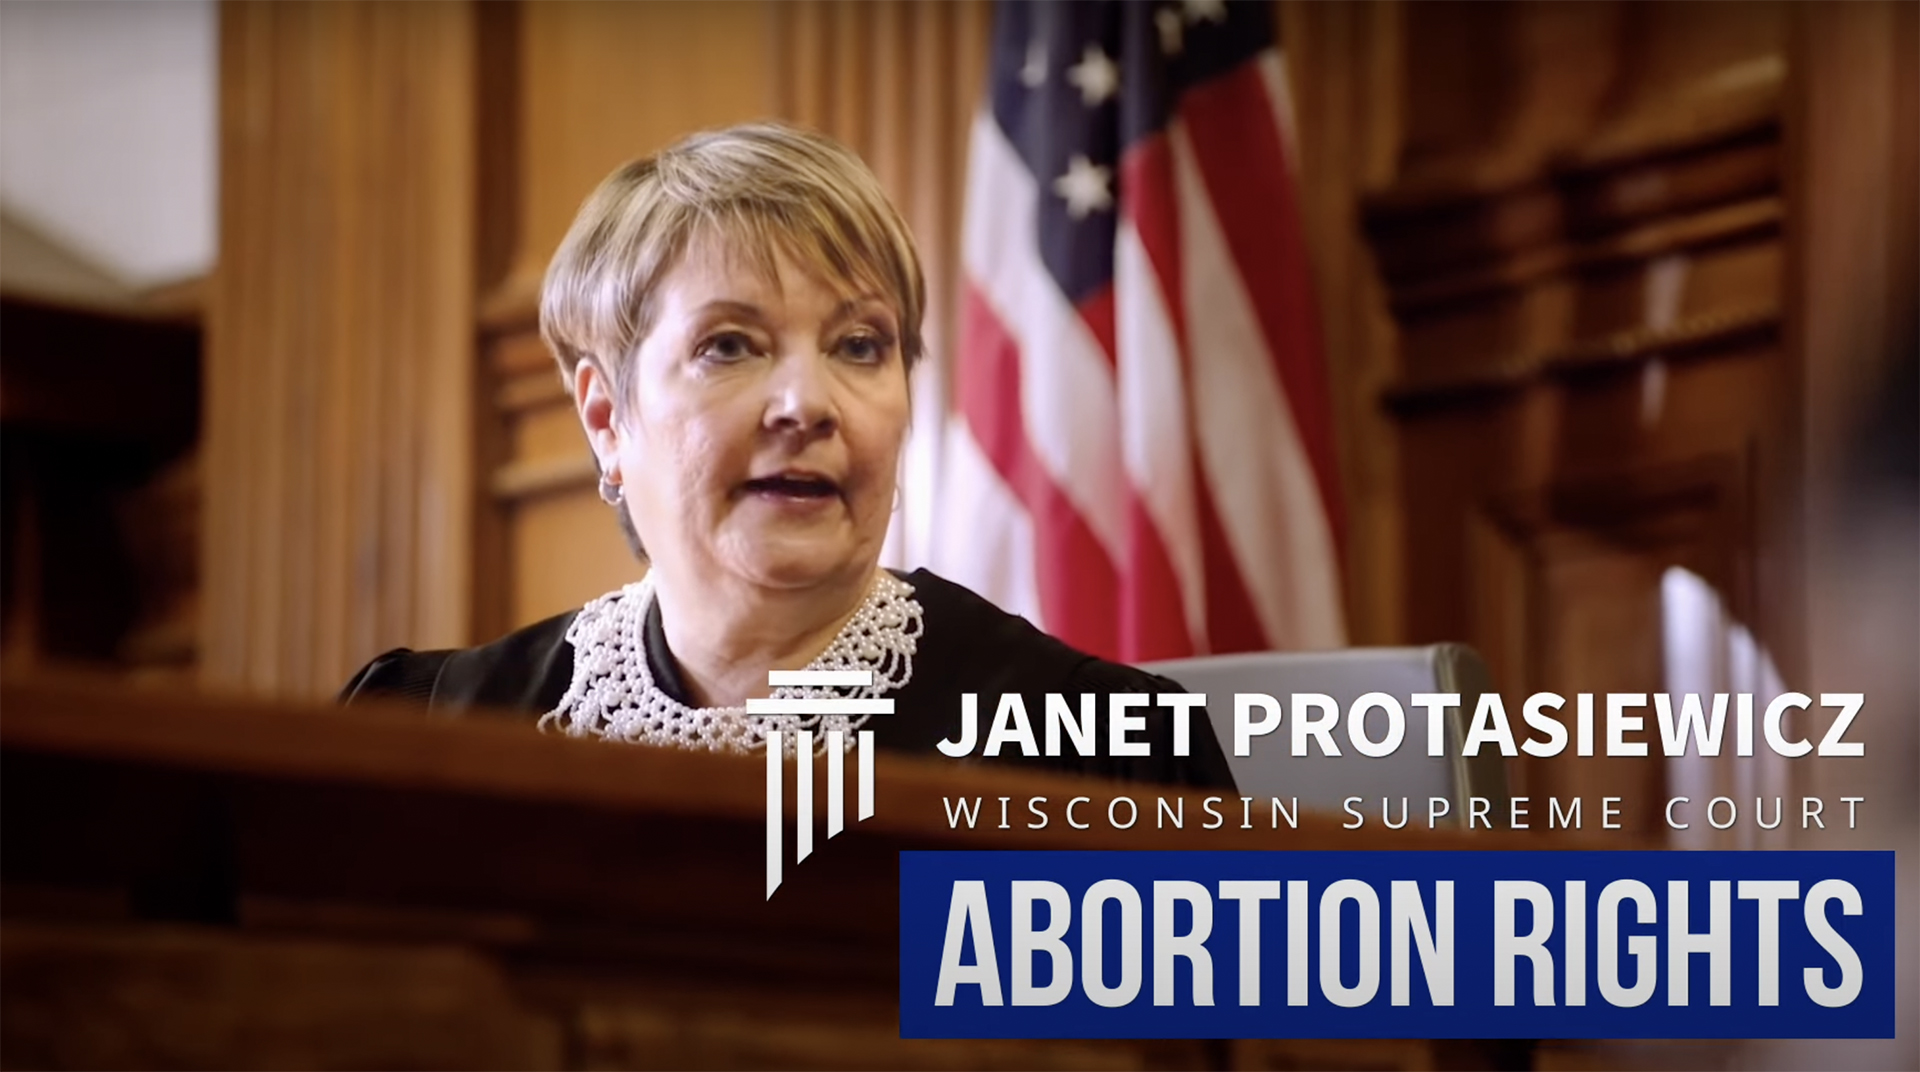 A still image from a video shows Janet Protasiewicz sitting at a judicial dais with the words "Janet Protasiewicz," "Wisconsin Supreme Court" and "Abortion Rights."